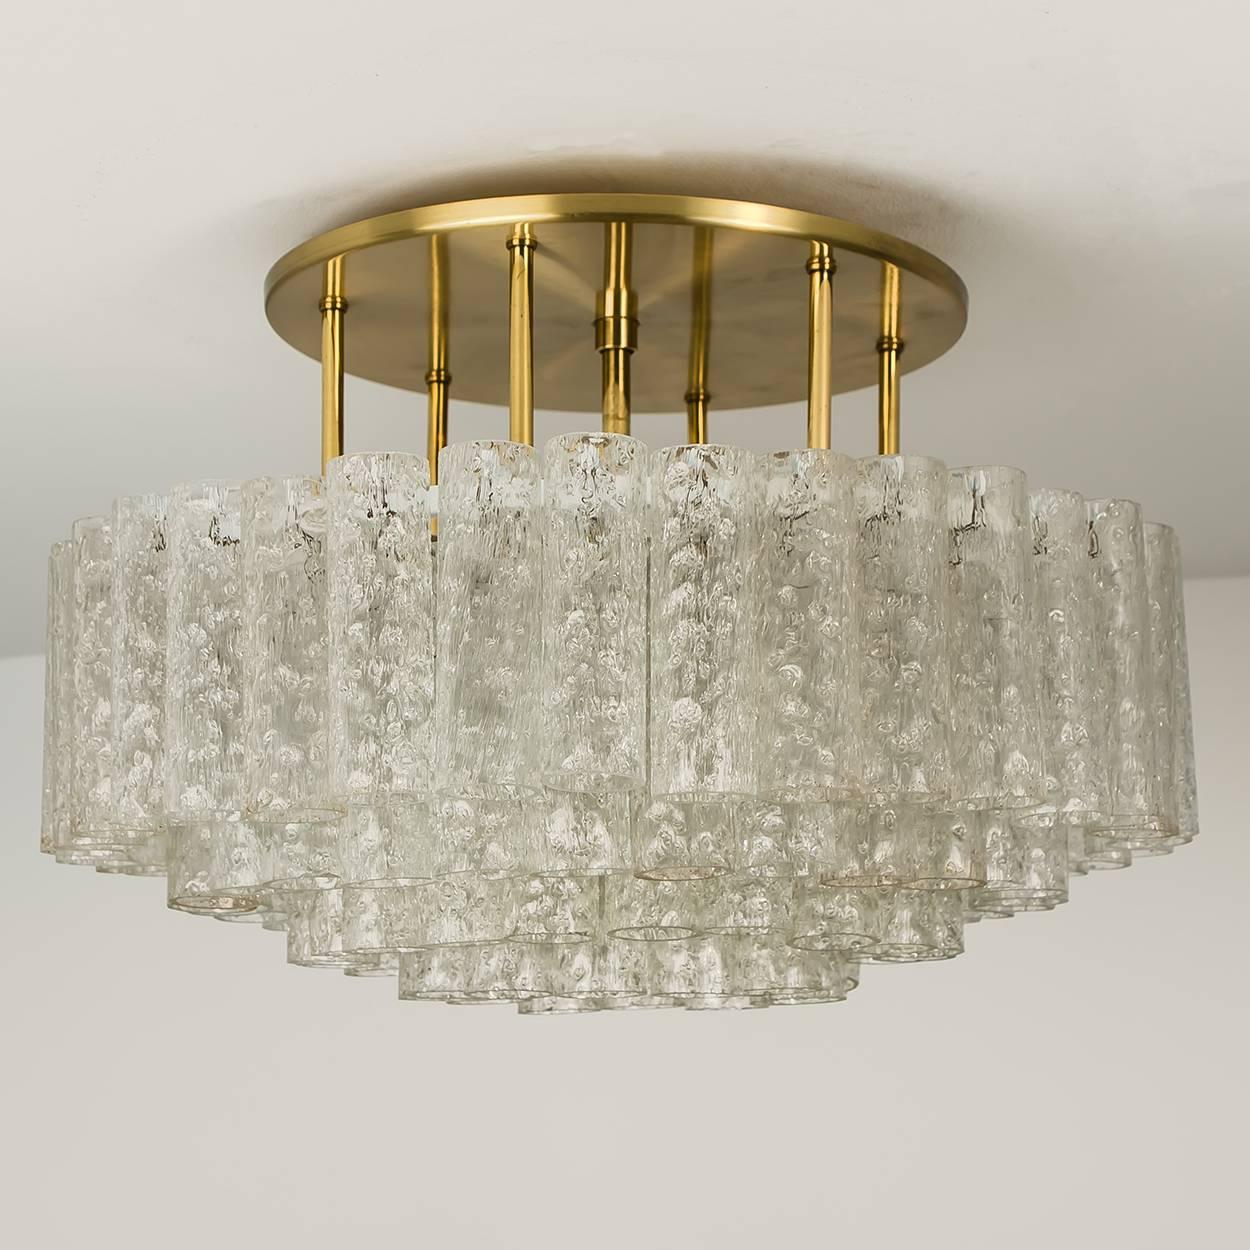 Set of Three Large Glass Brass Light Fixtures by Doria, Germany, 1969 For Sale 7